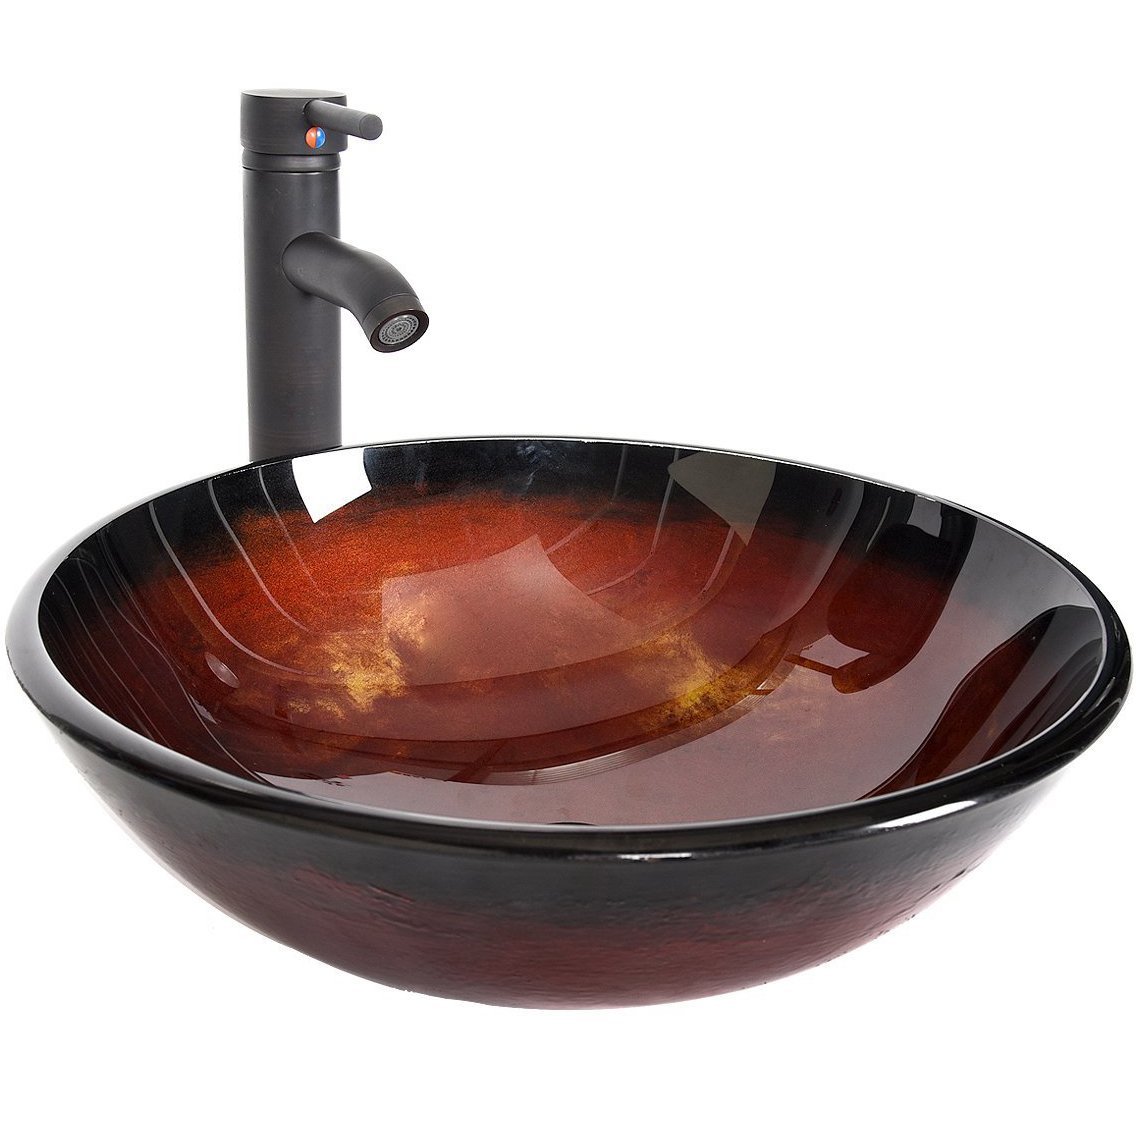 Bracilia Red Bathroom Vessel Sink With Faucet